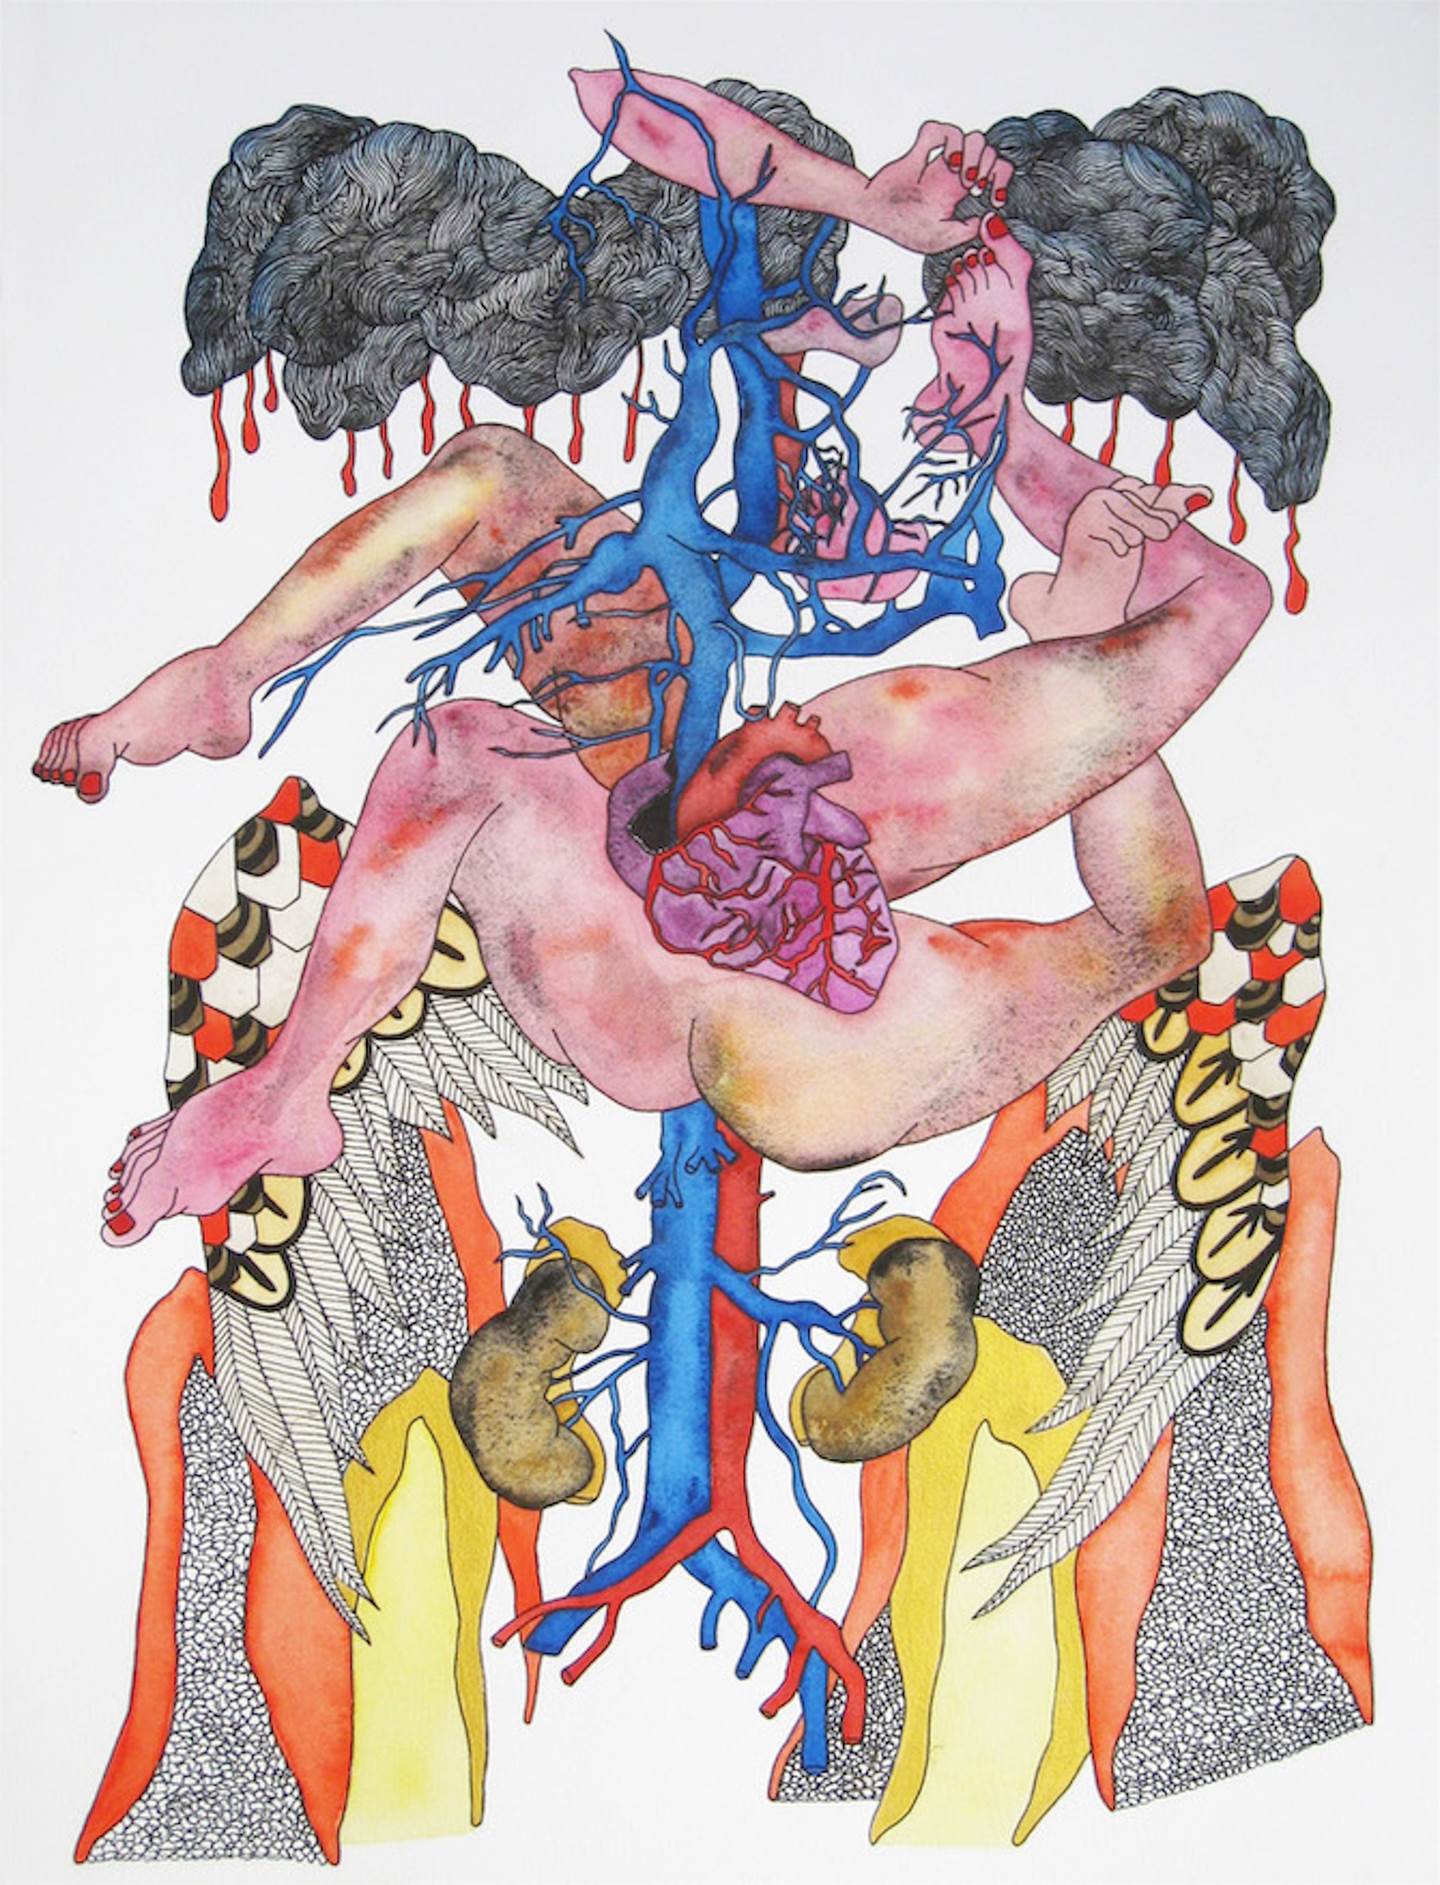 Anatomie 2, original Body Watercolor Drawing and Illustration by Lorinet Julie